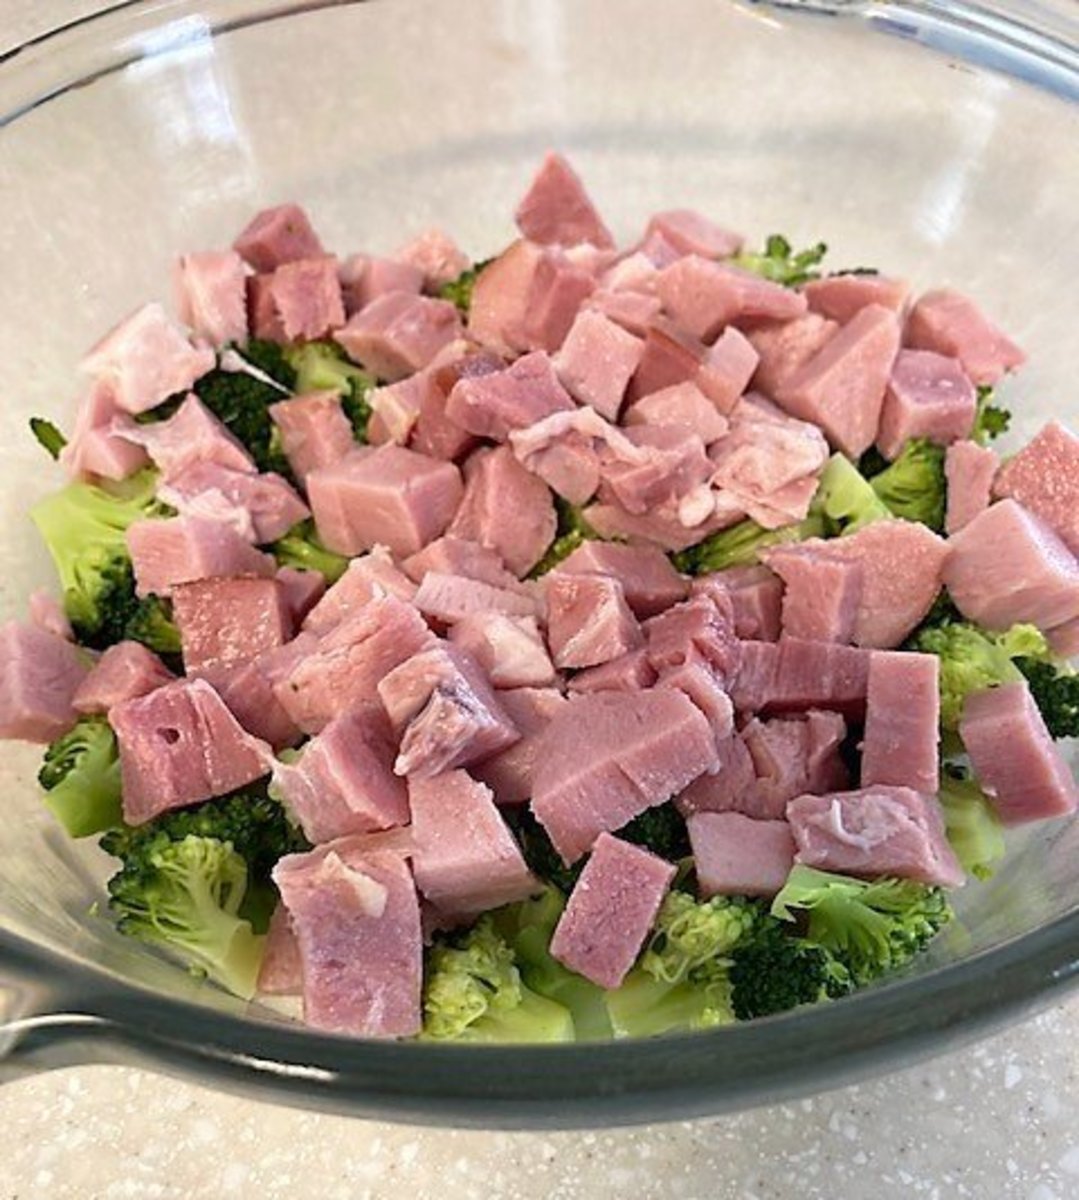 Chop ham and spread over the broccoli.